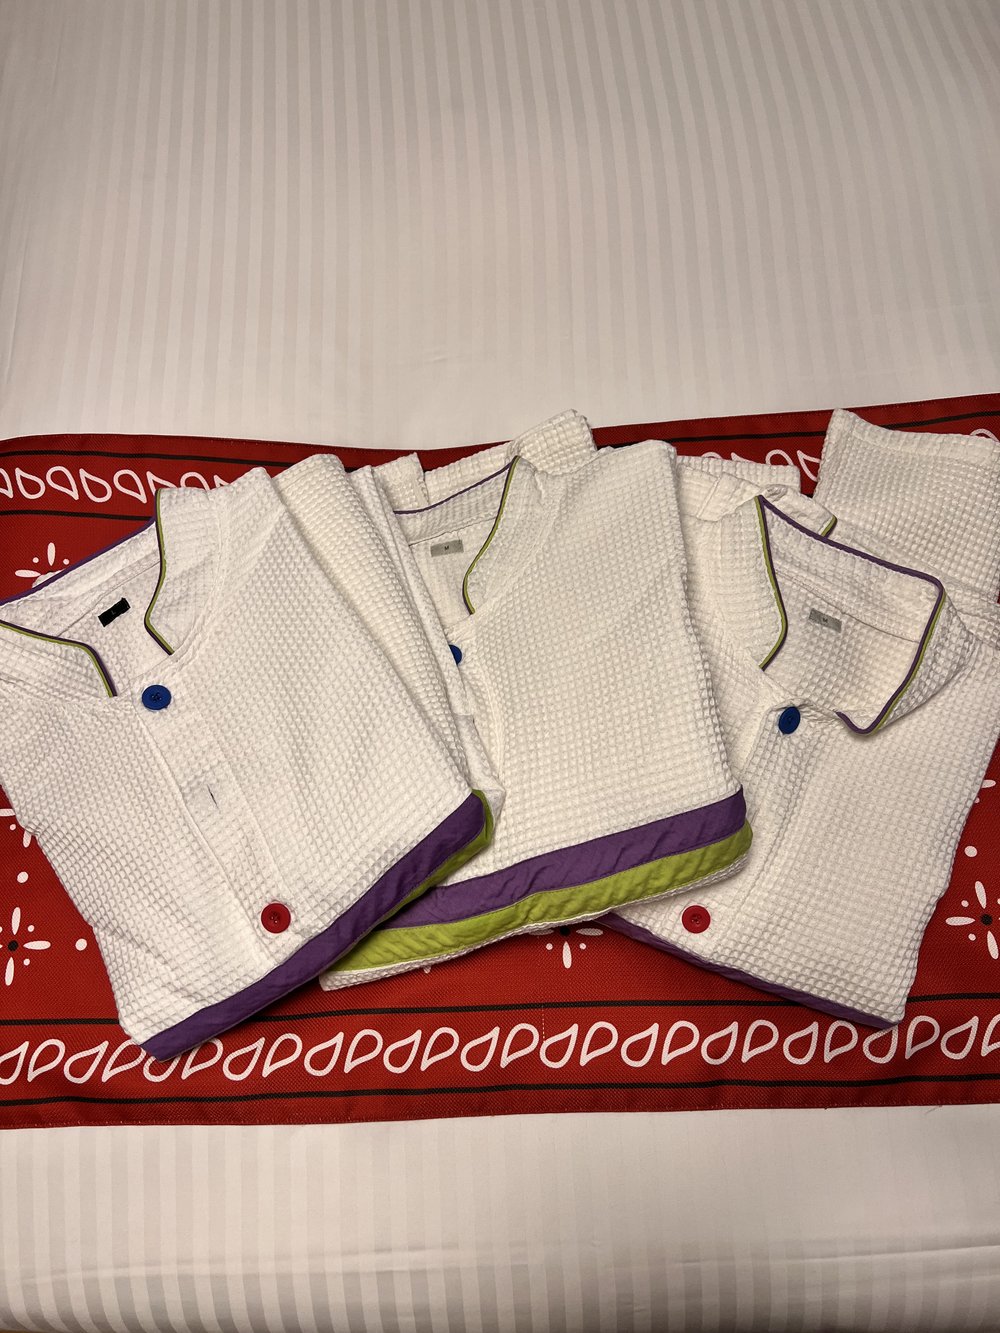  Three pajama sets that are white with purple and green stripes to look like Buzz Lightyear 